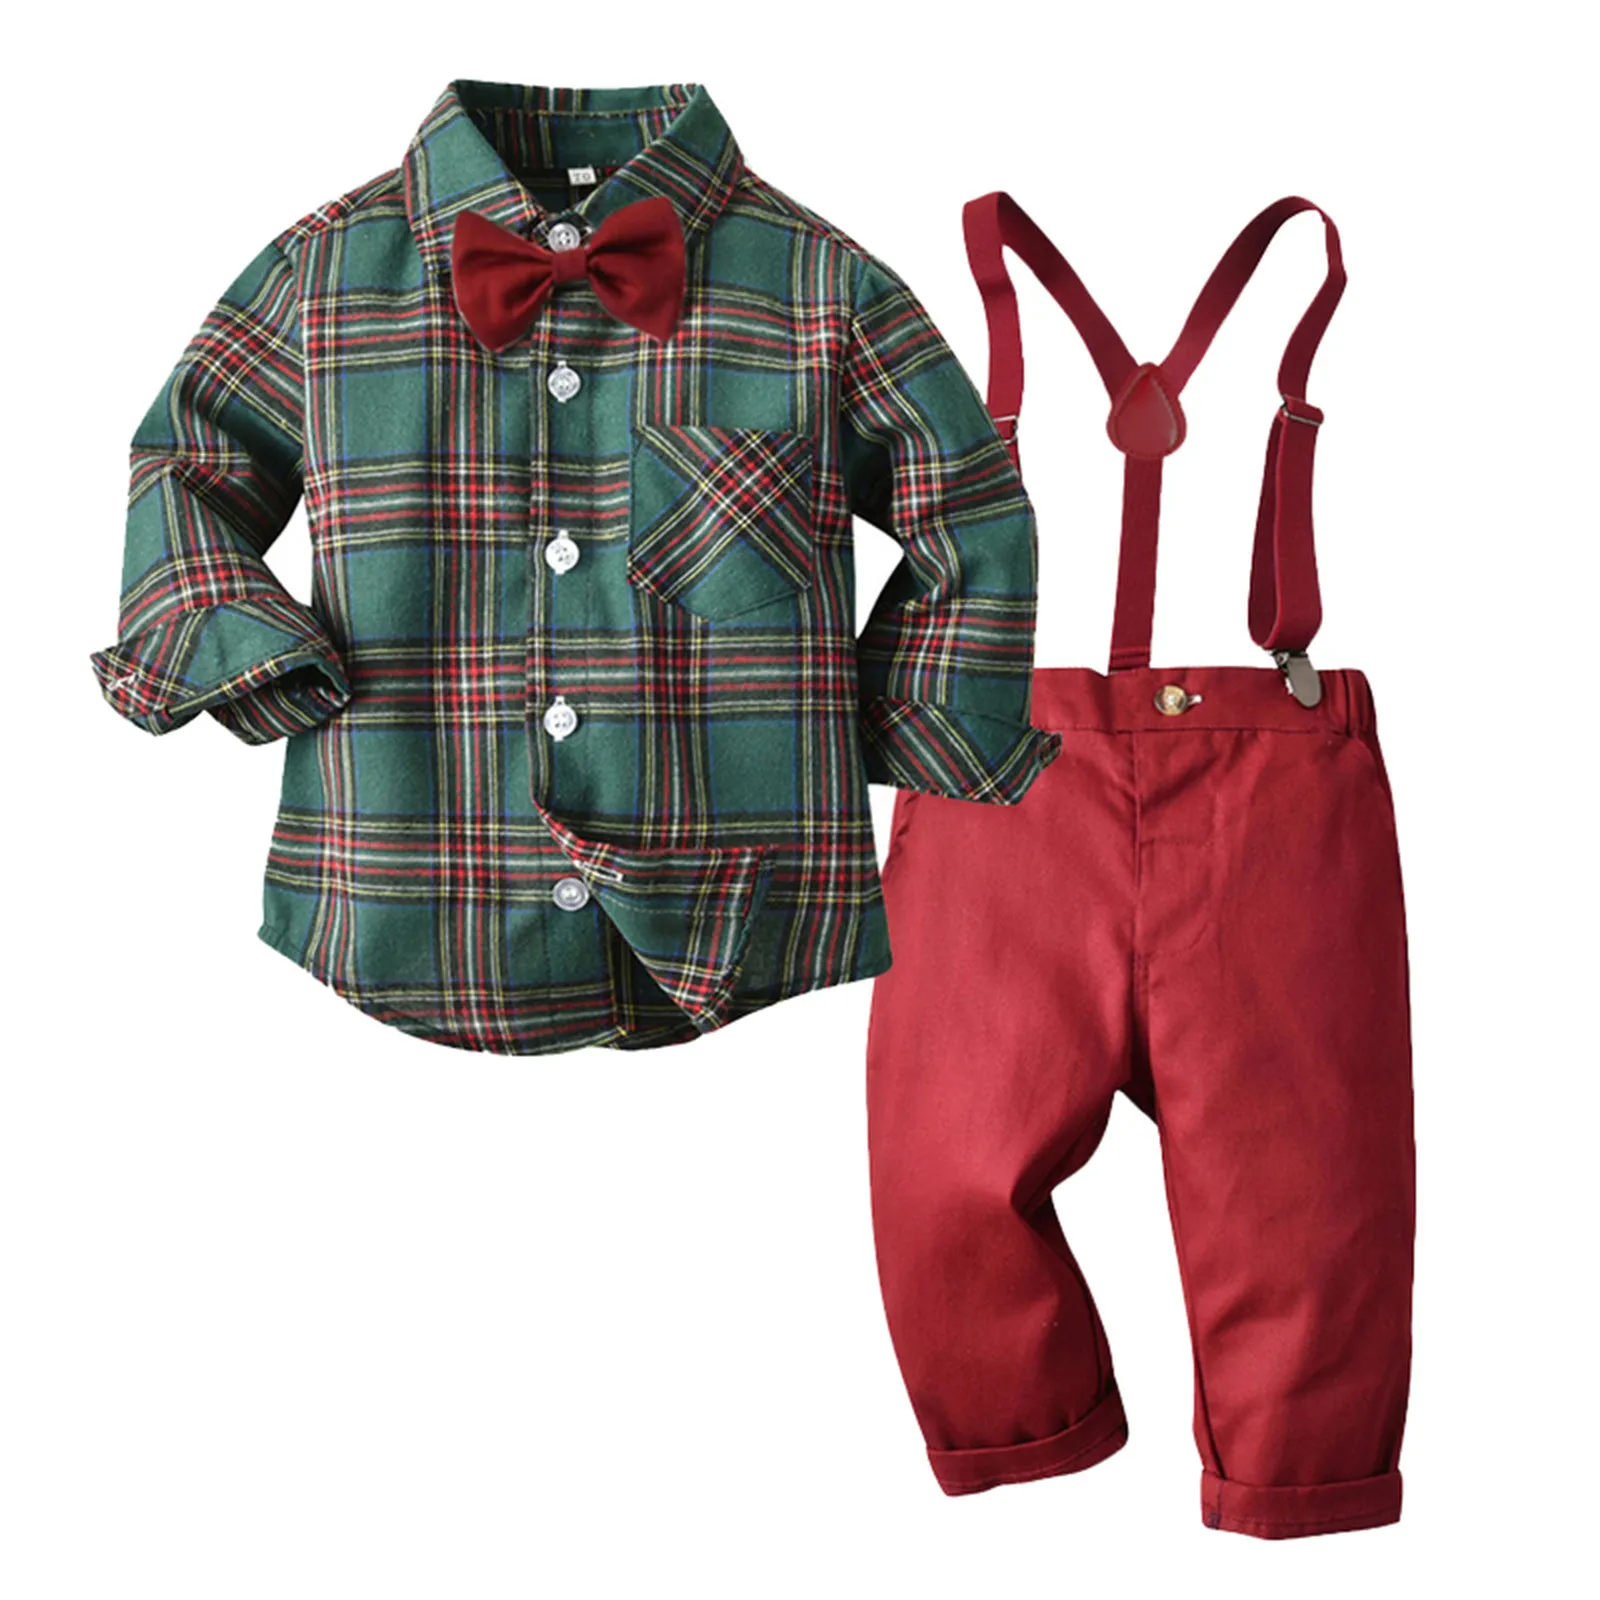 

Kids Clothes Girls Ropa Sets toddler Baby Boys Gentleman Bow Tie Plaid T-shirt Tops+suspender Pants Outfits деская дежда